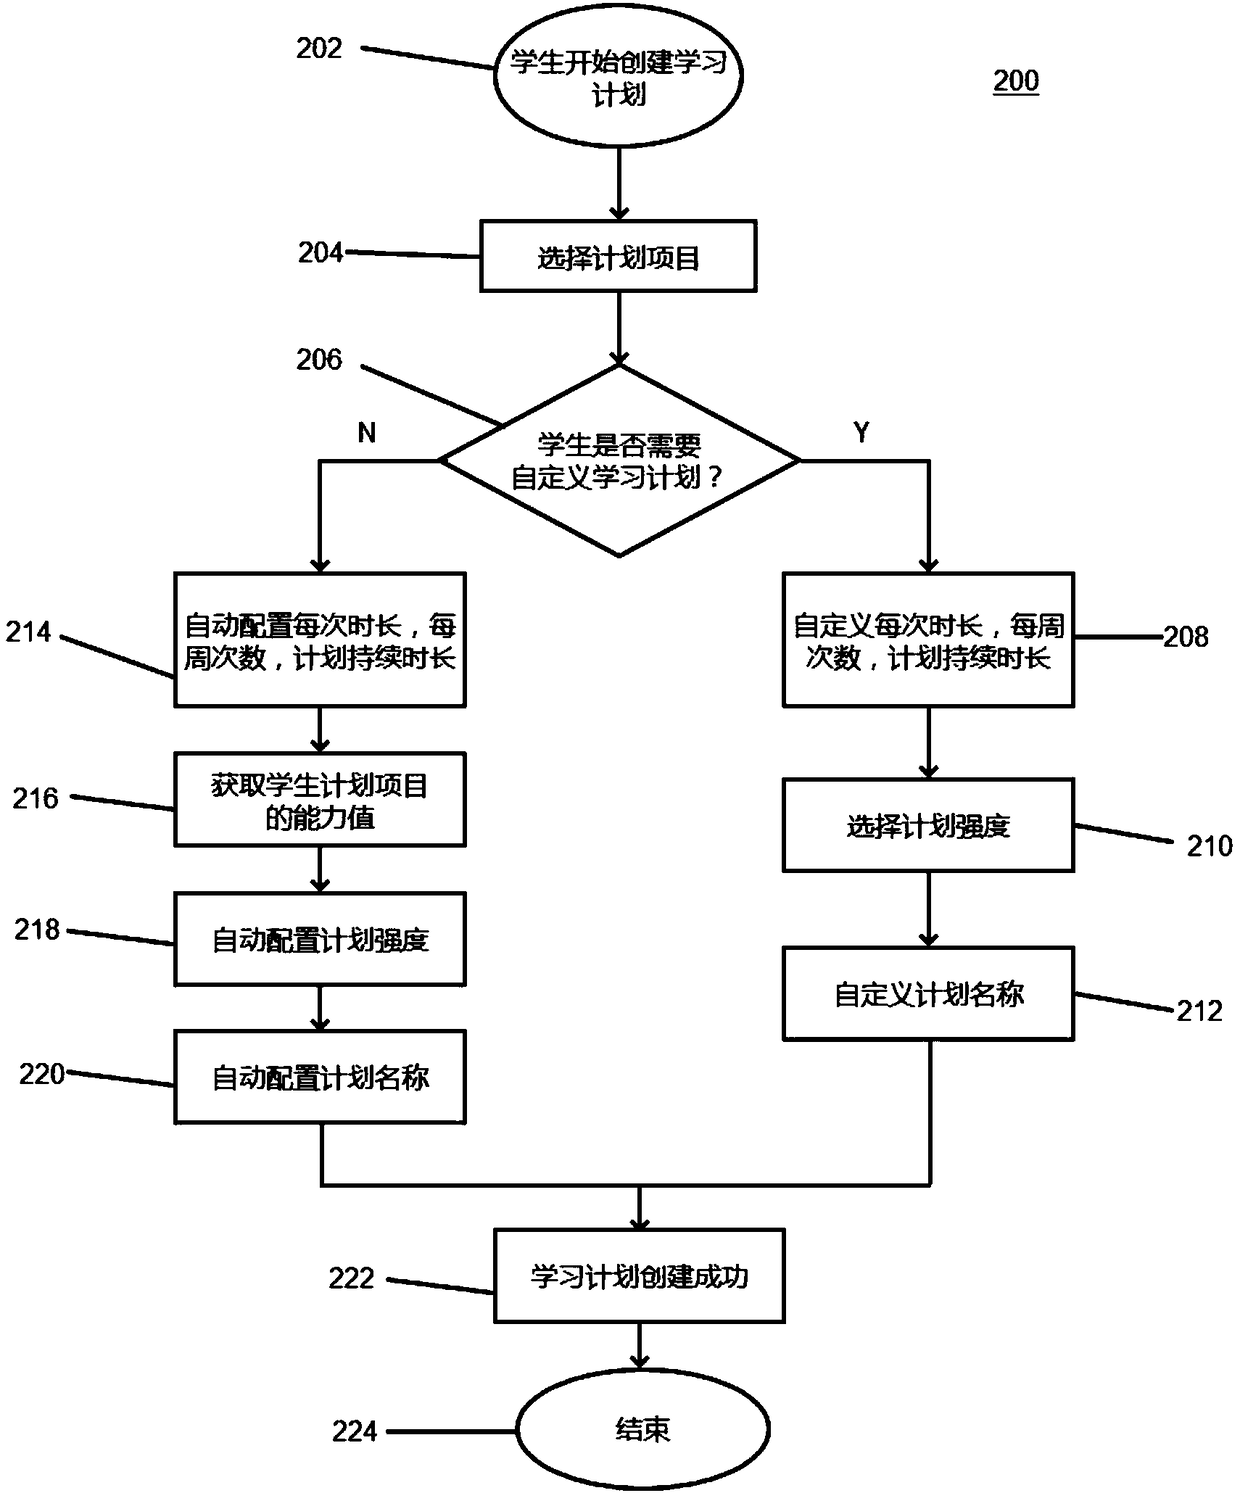 An adaptive learning recommendation method and apparatus